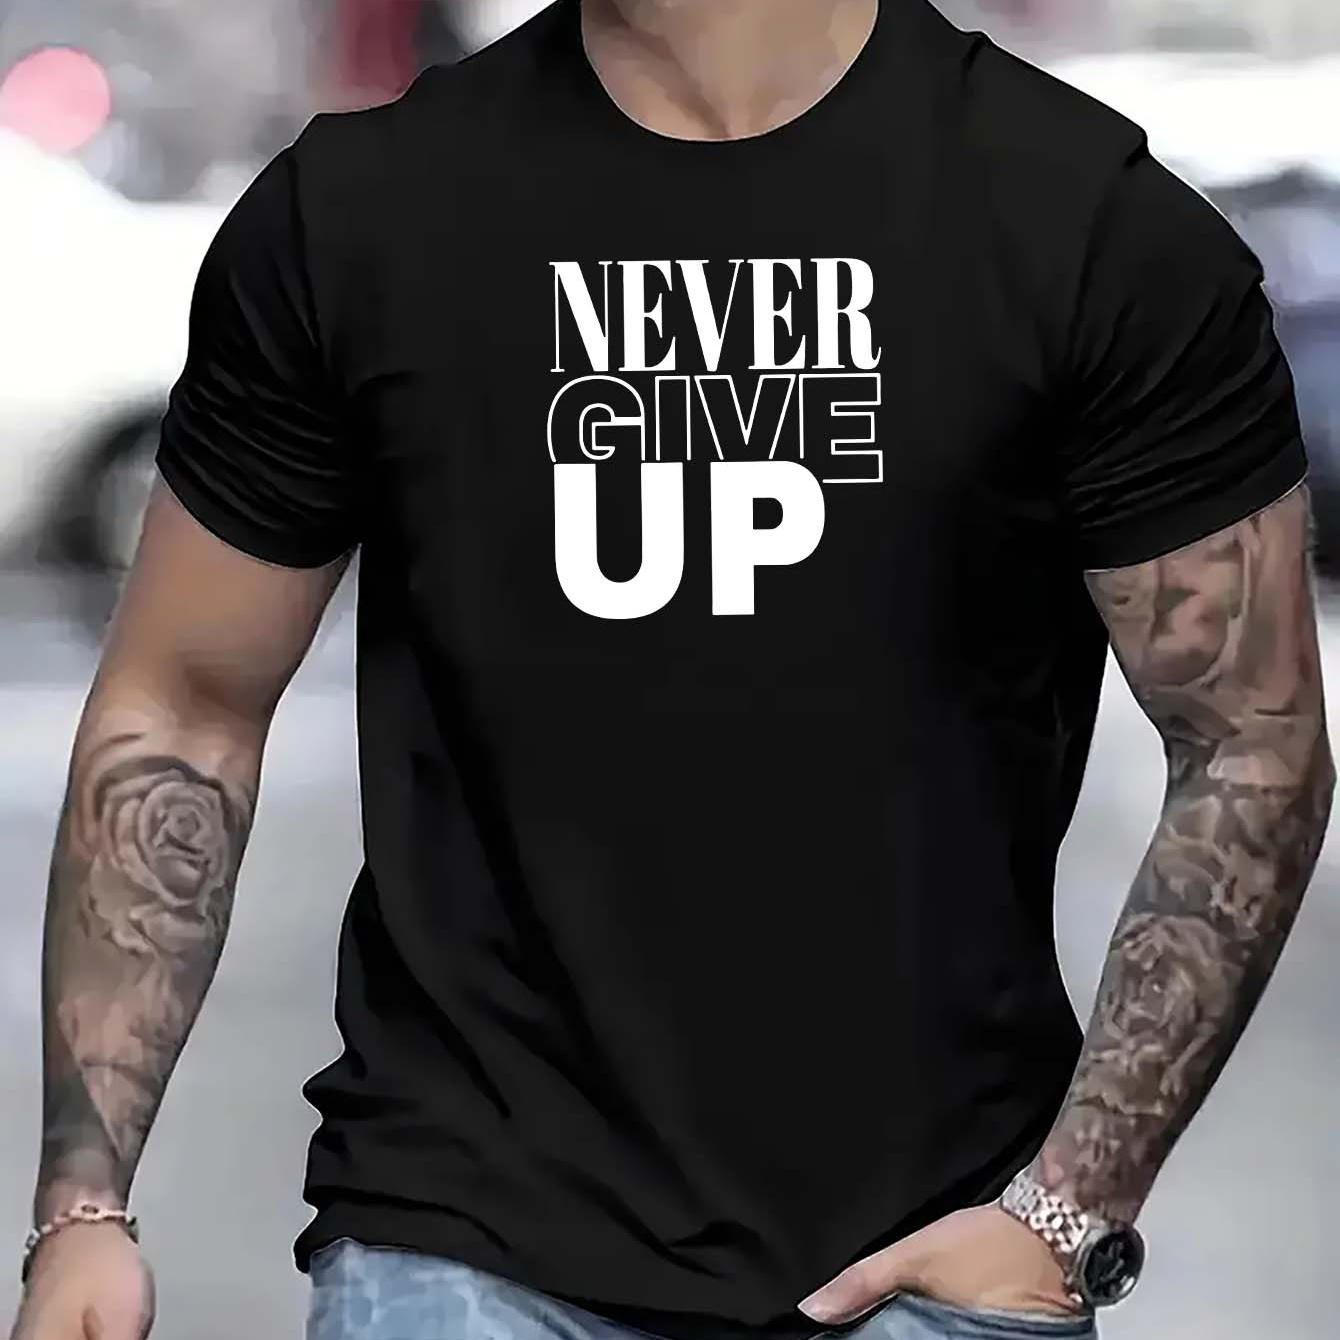 

Never Give Up Print, Men's Graphic Design Crew Neck Active T-shirt, Casual Comfy Tees Tshirts For Summer, Men's Clothing Tops For Daily Gym Workout Running